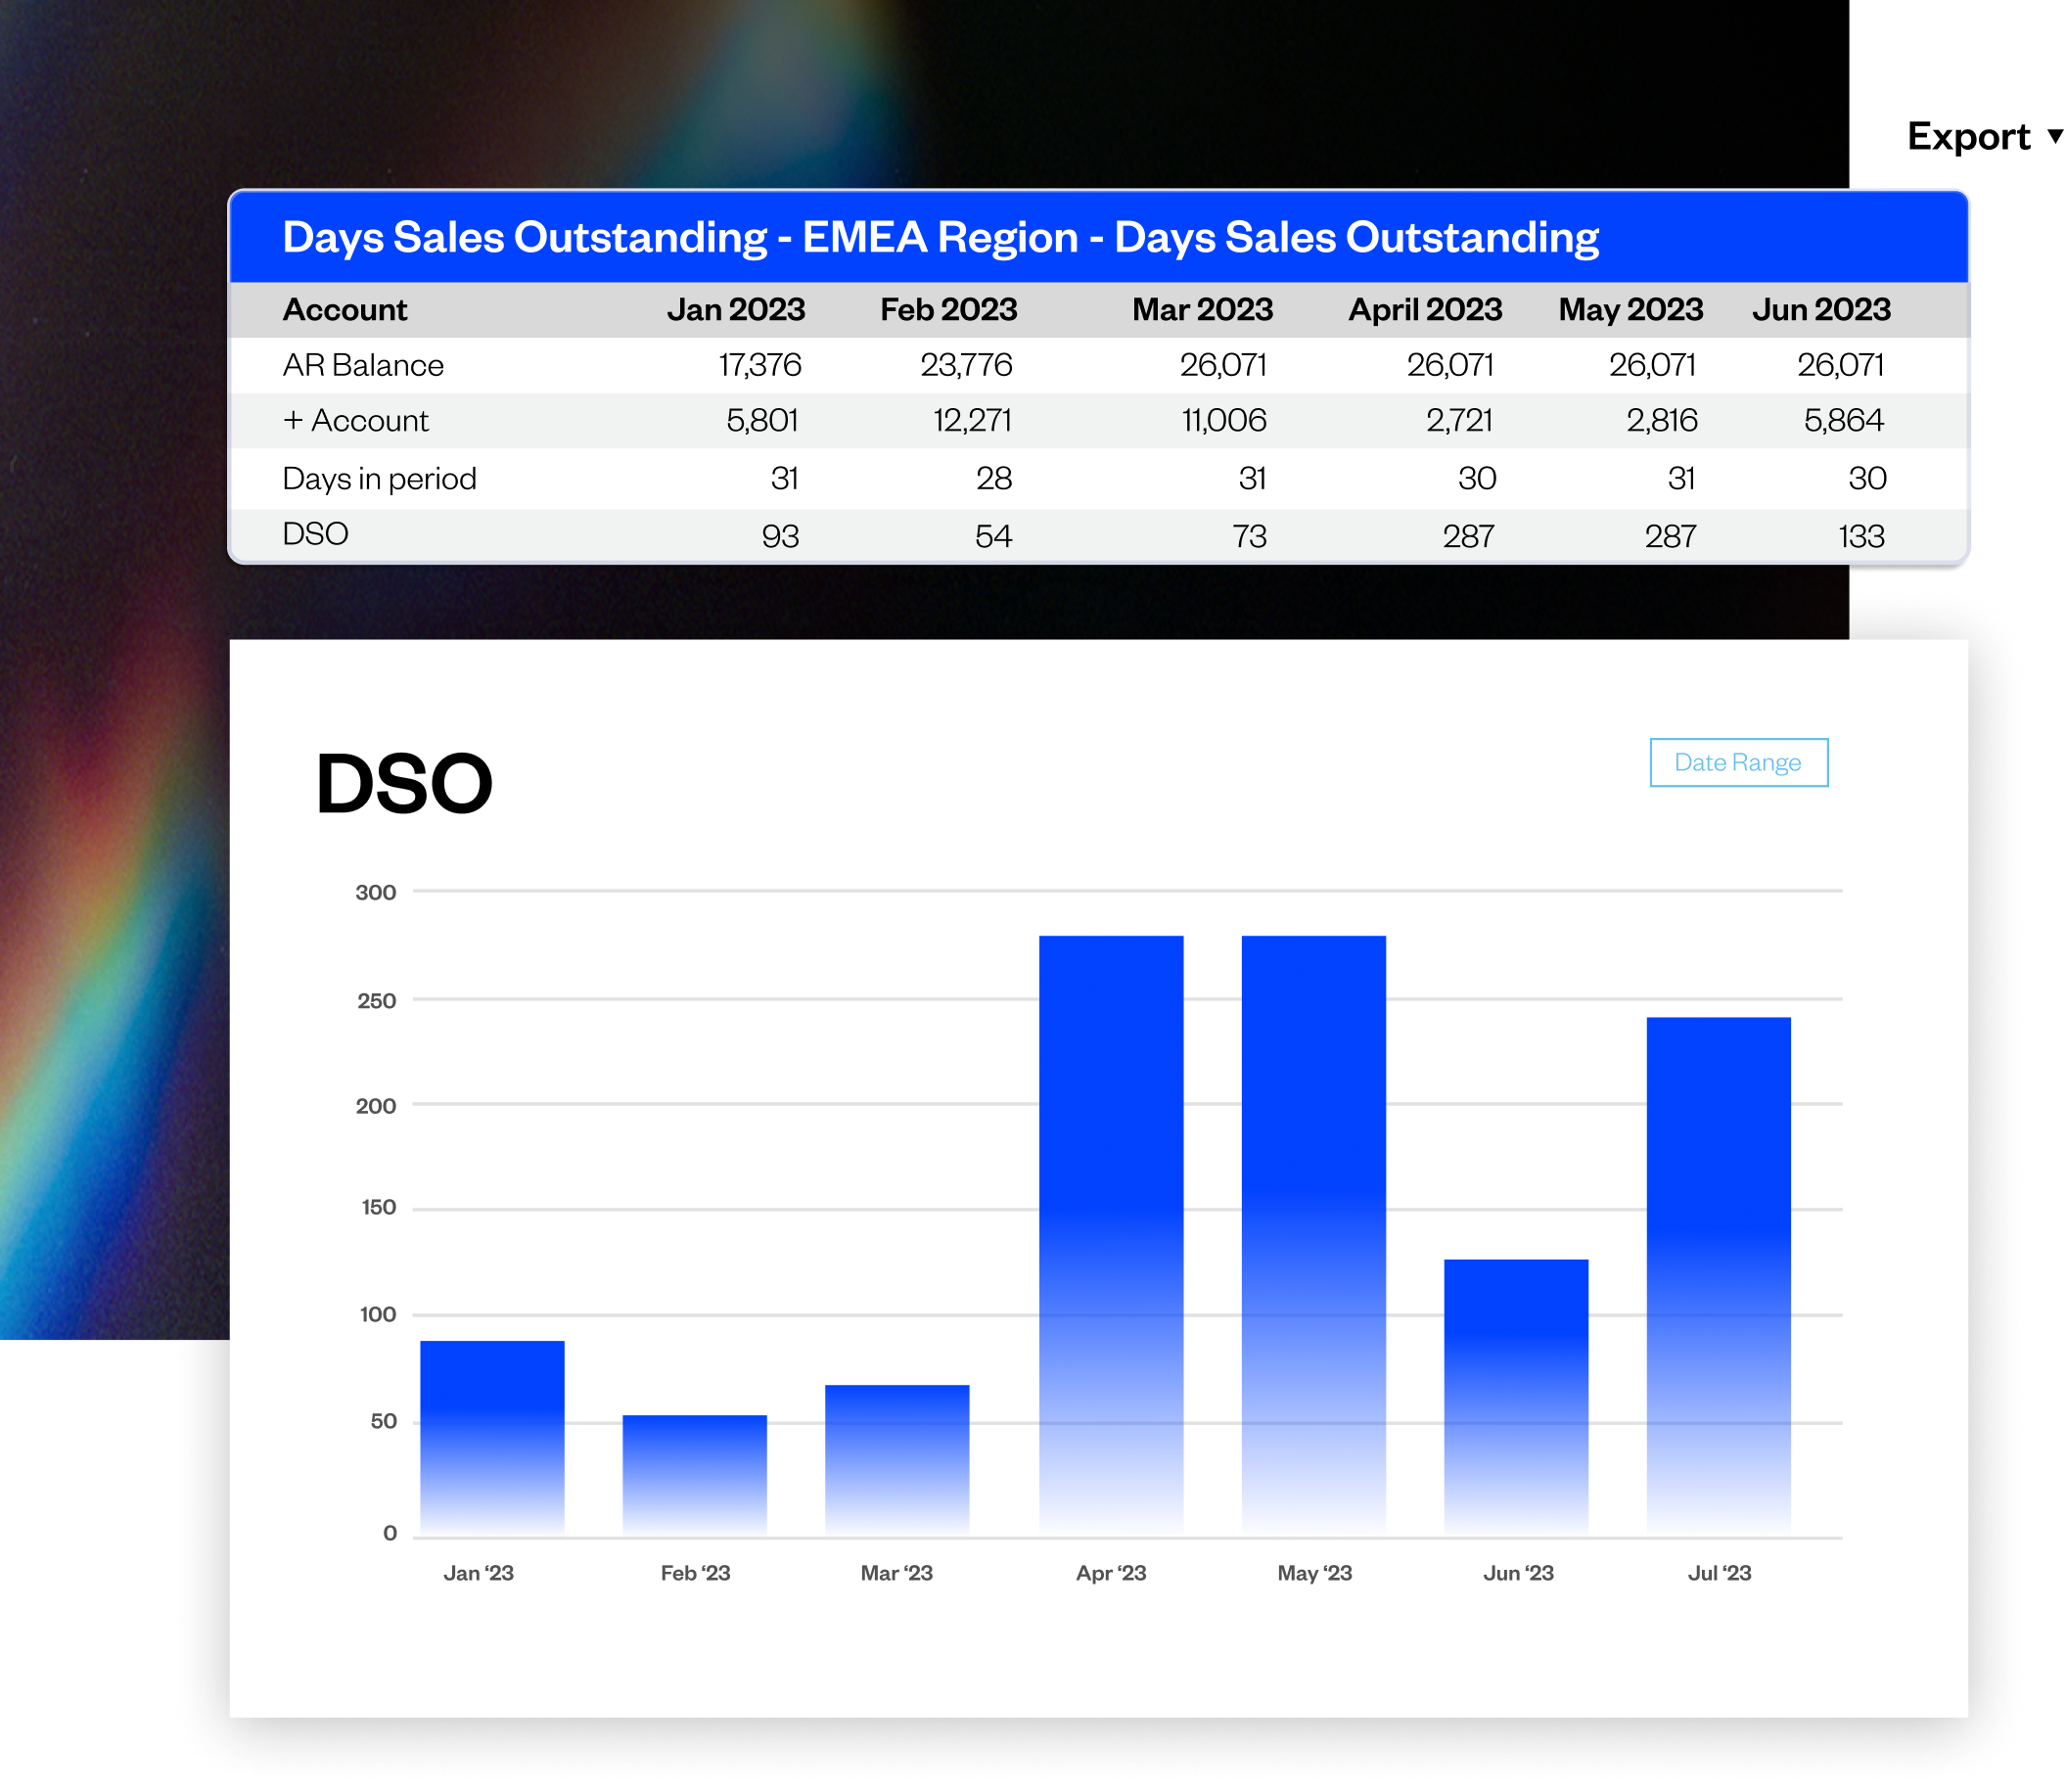 An example of Maxio's Days Sales Outstanding report, looking at the EMEA region. The image shows both a table of information and a bar chart visualization of the data.